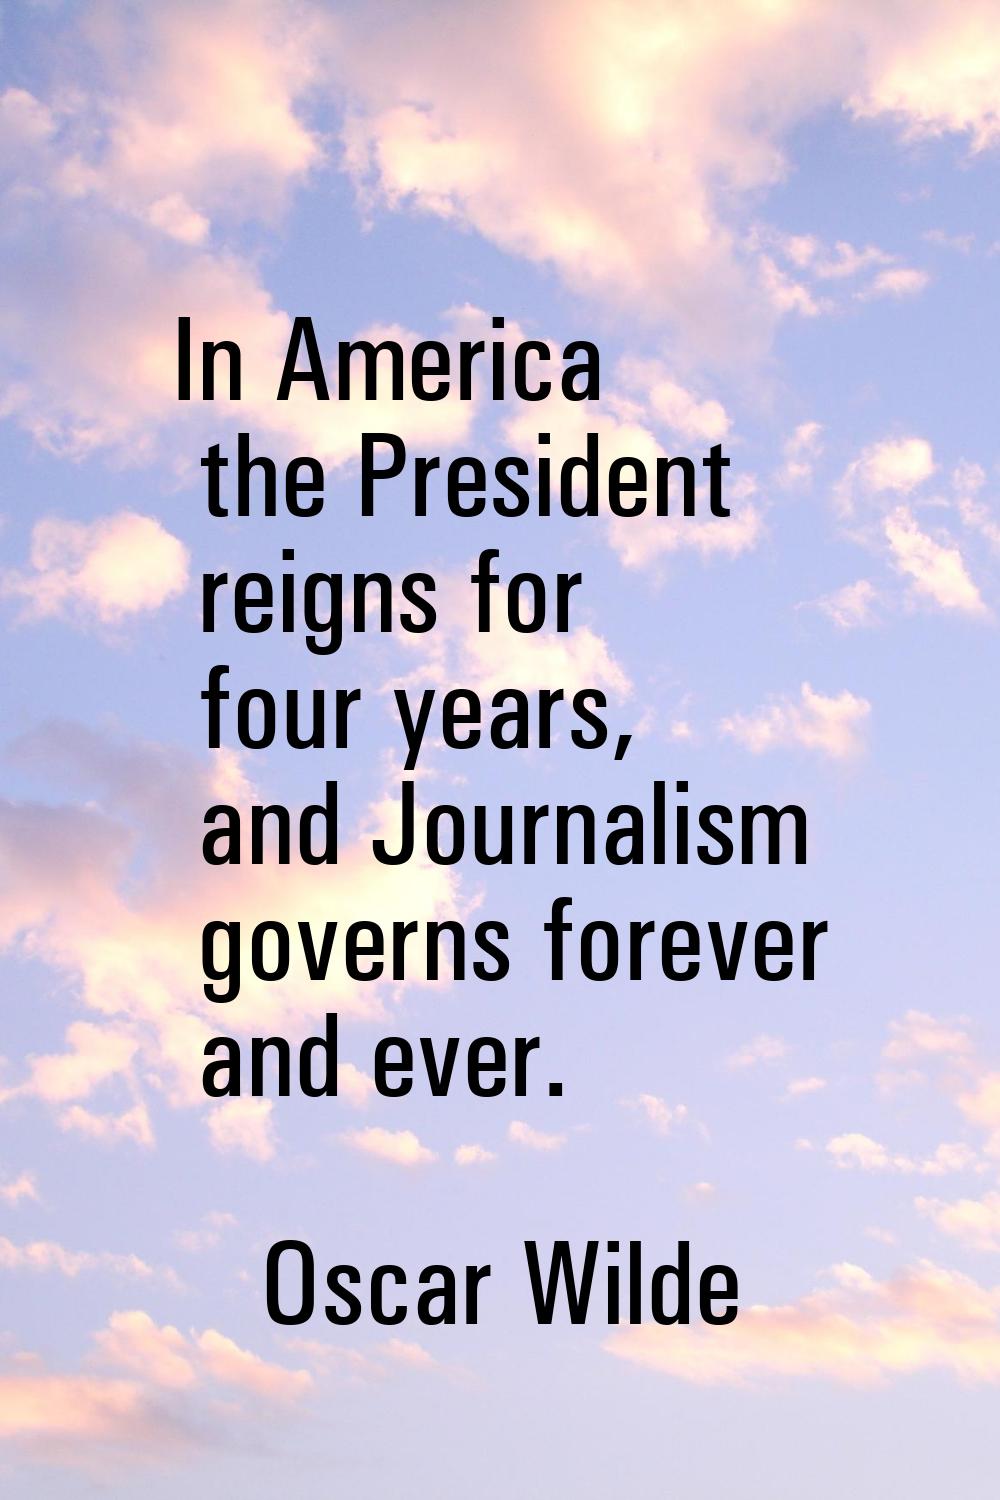 In America the President reigns for four years, and Journalism governs forever and ever.